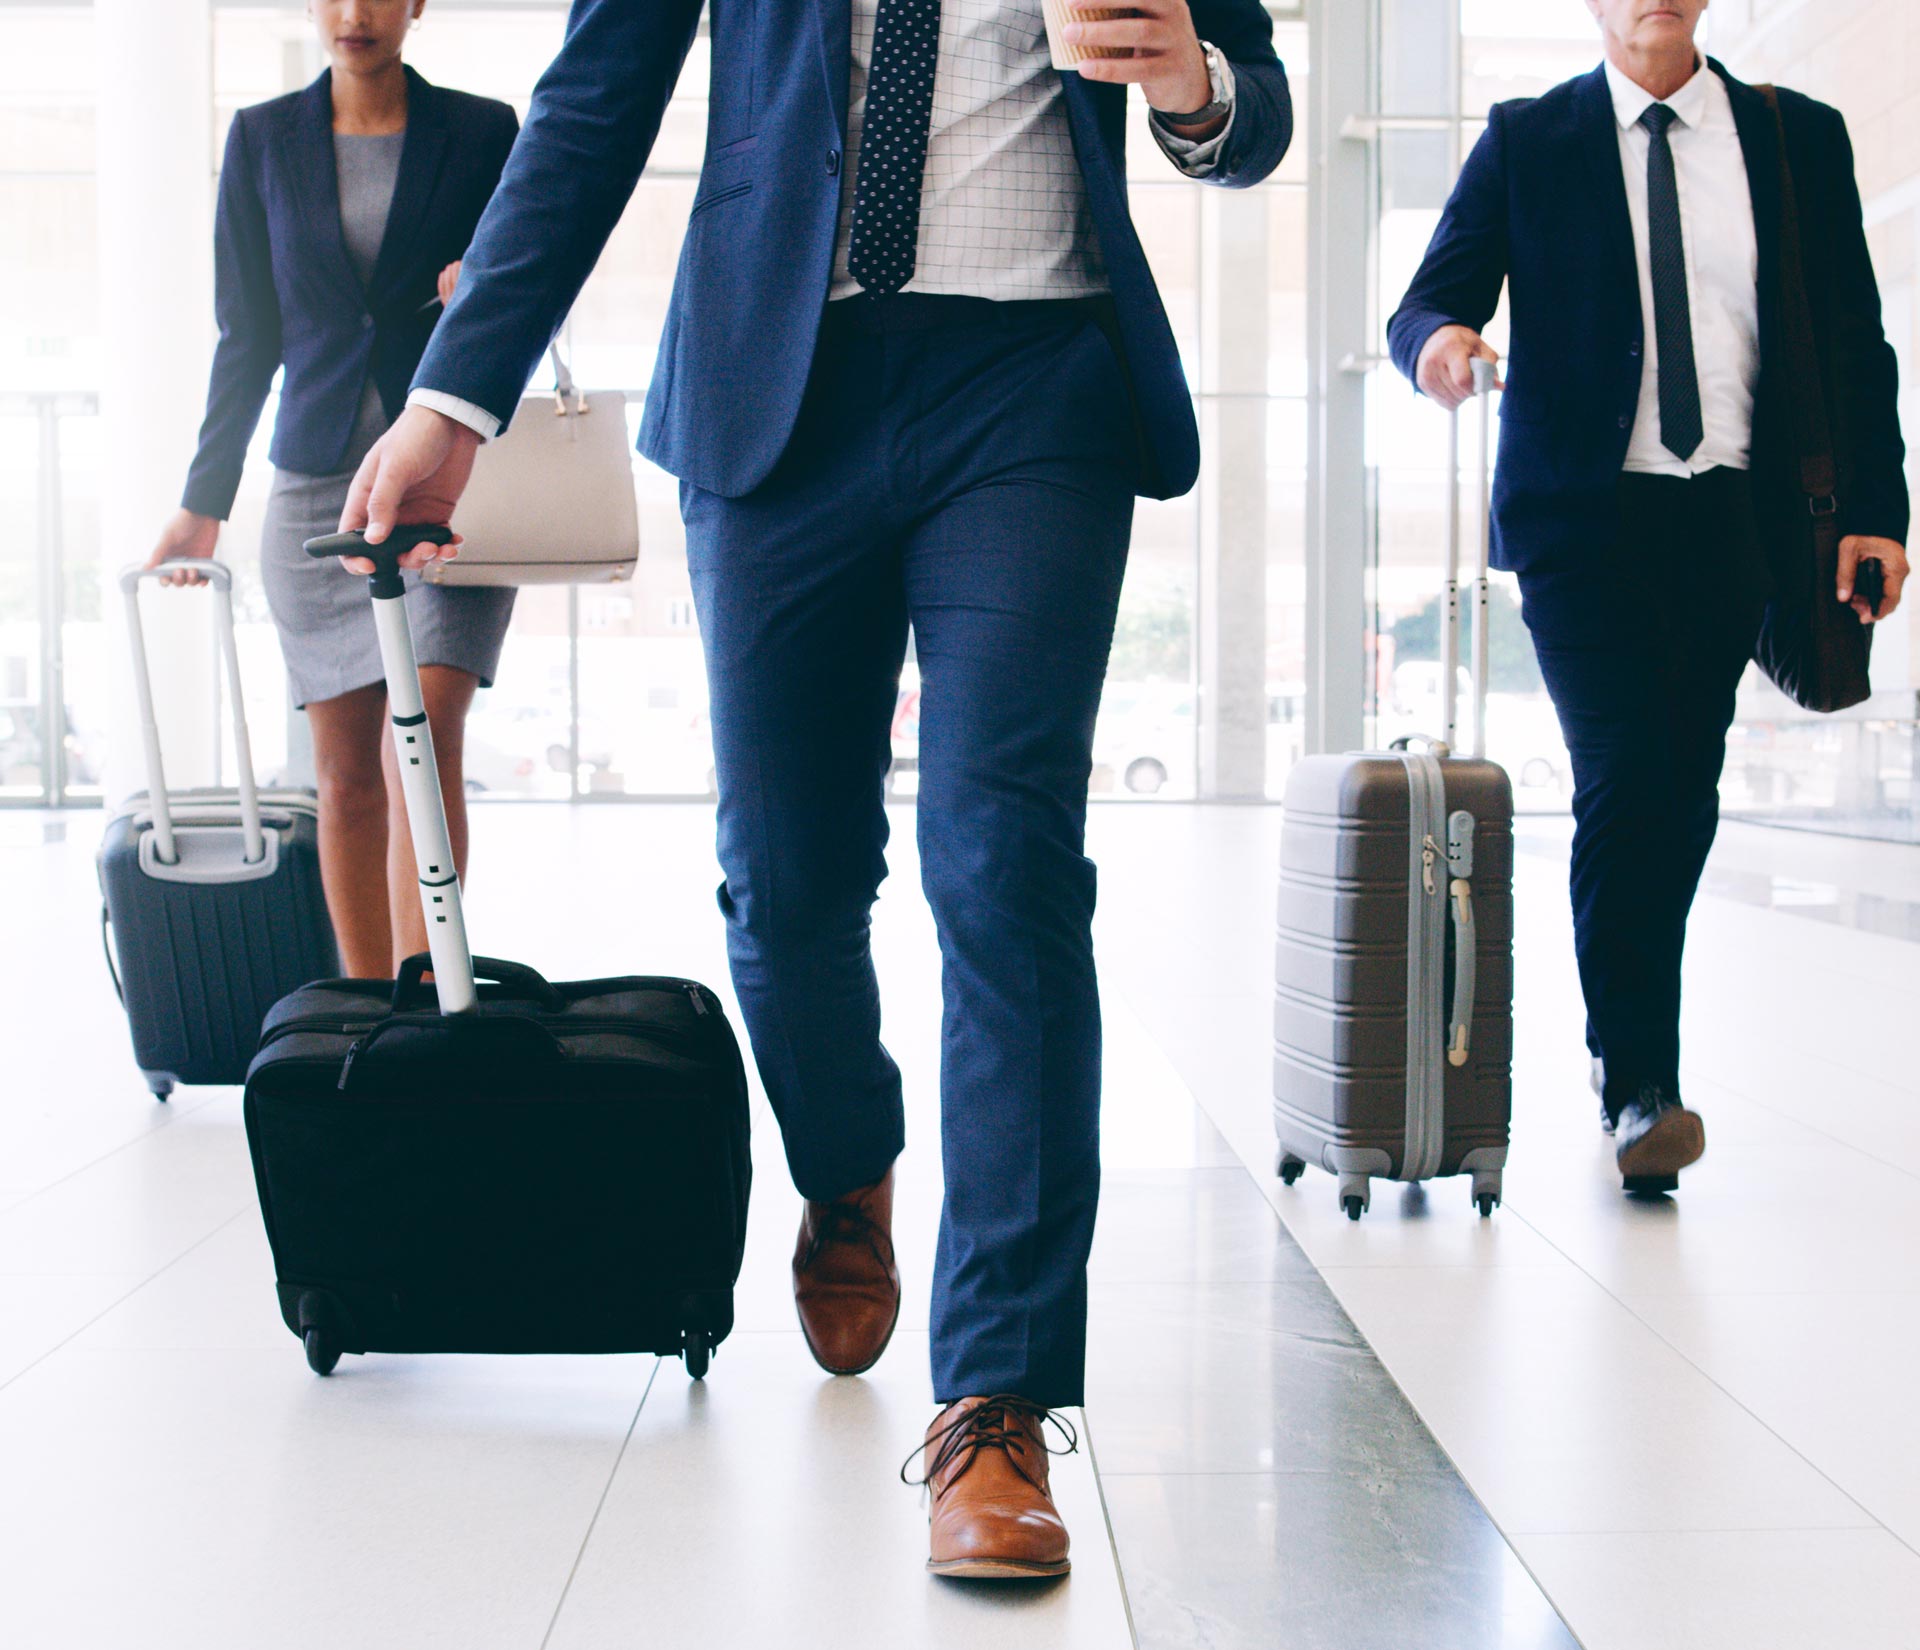 Travel Business People Suits